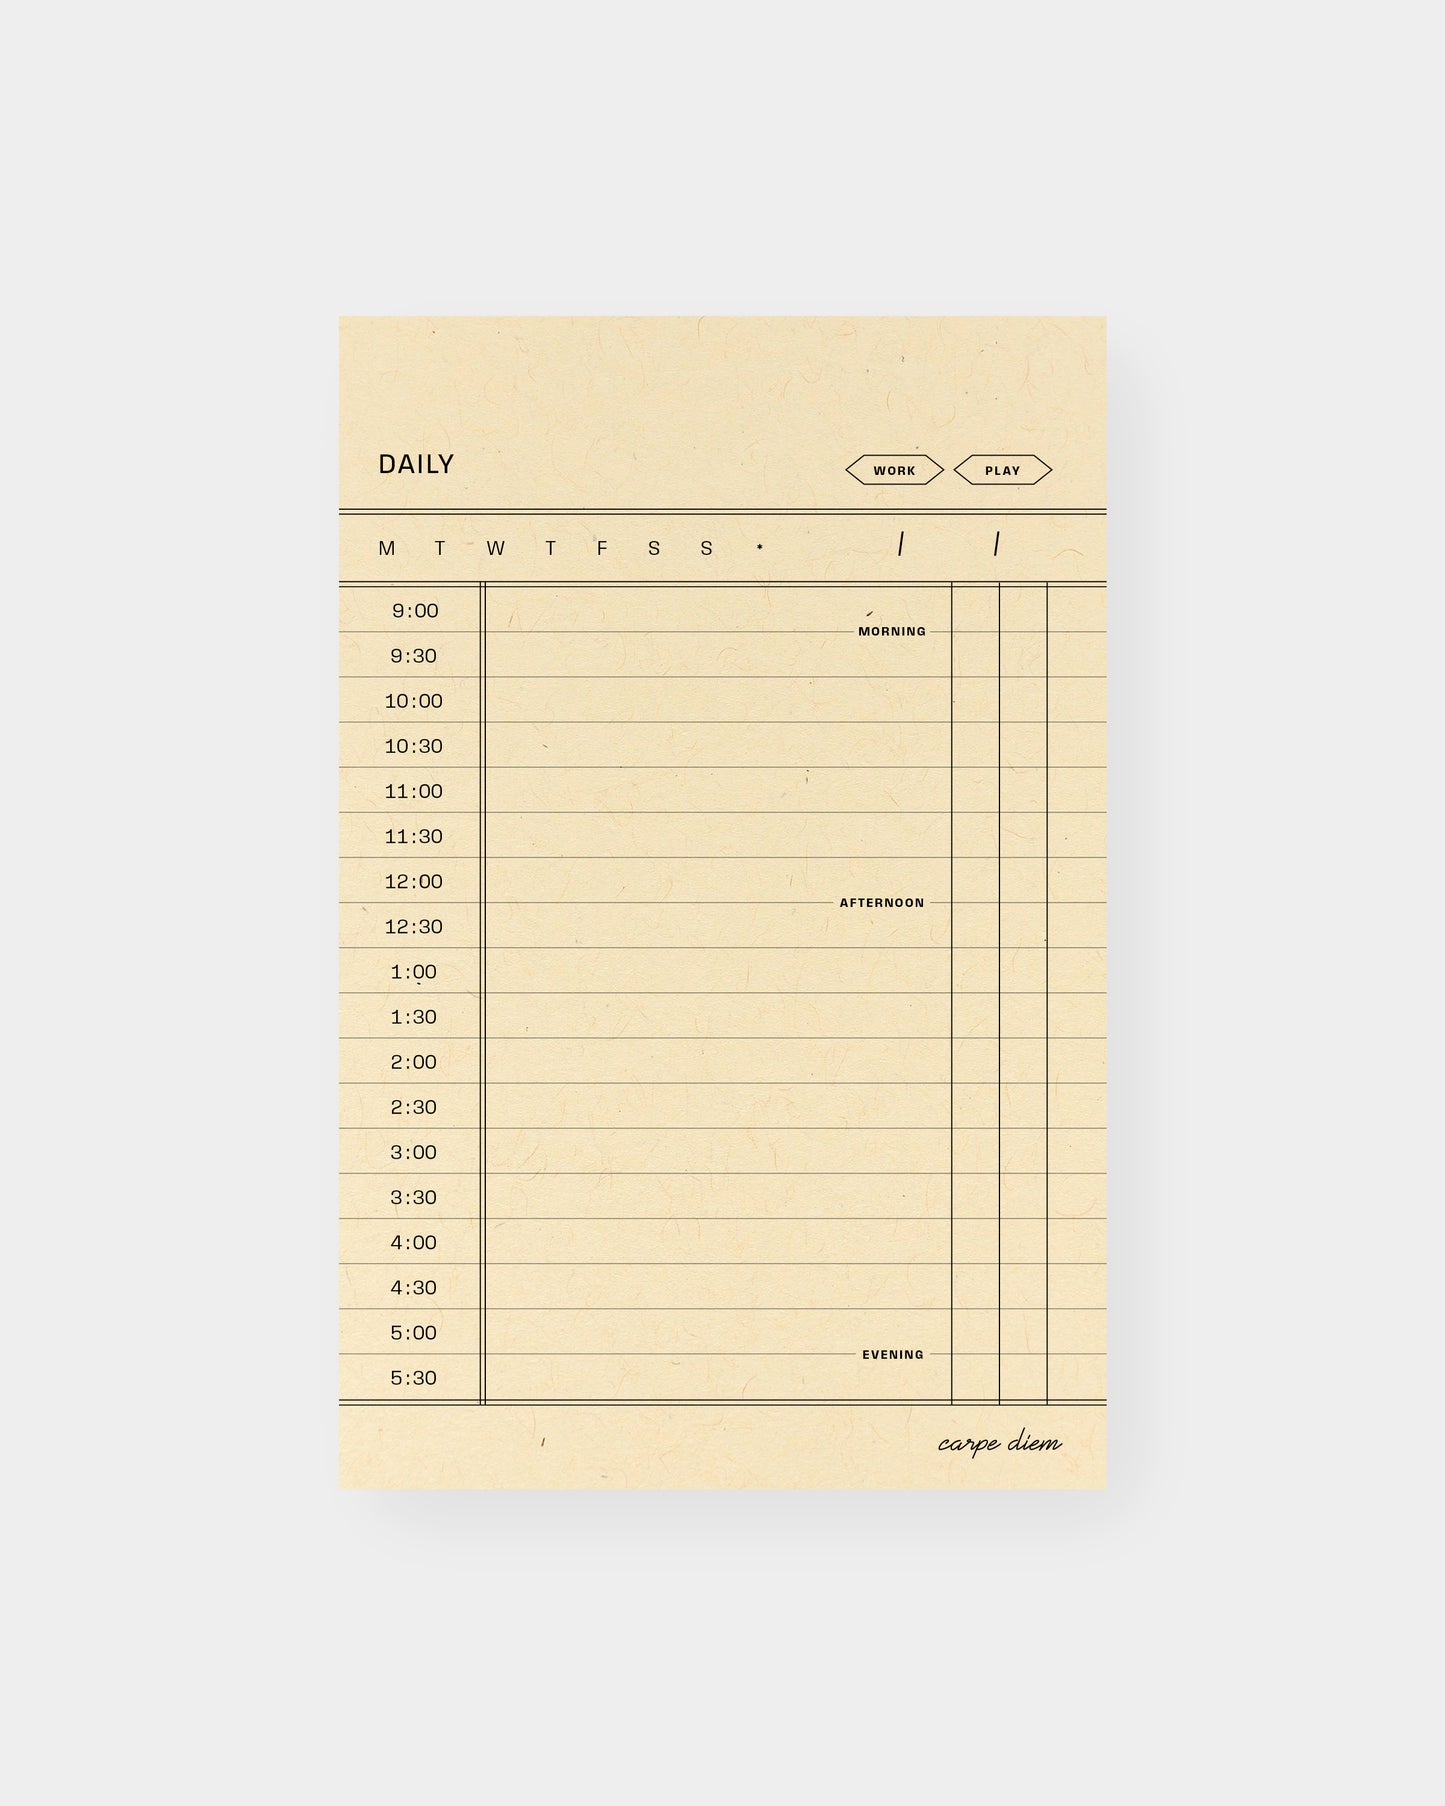 Daily planning notepad, retro library card inspired design. 4.25 x 6.5", Manila color way.